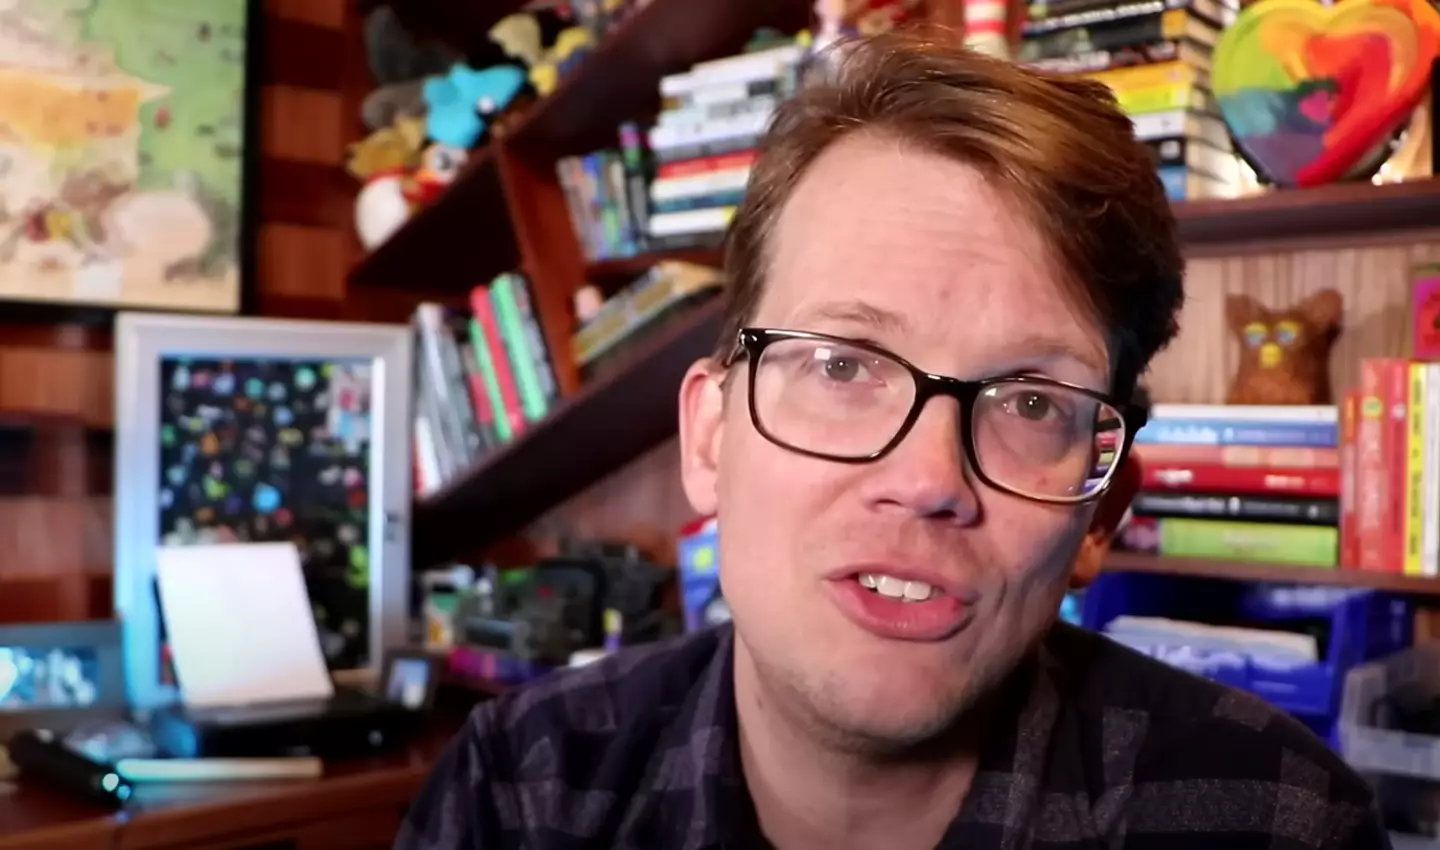 Hank Green revealed he has cancer in a YouTube video.